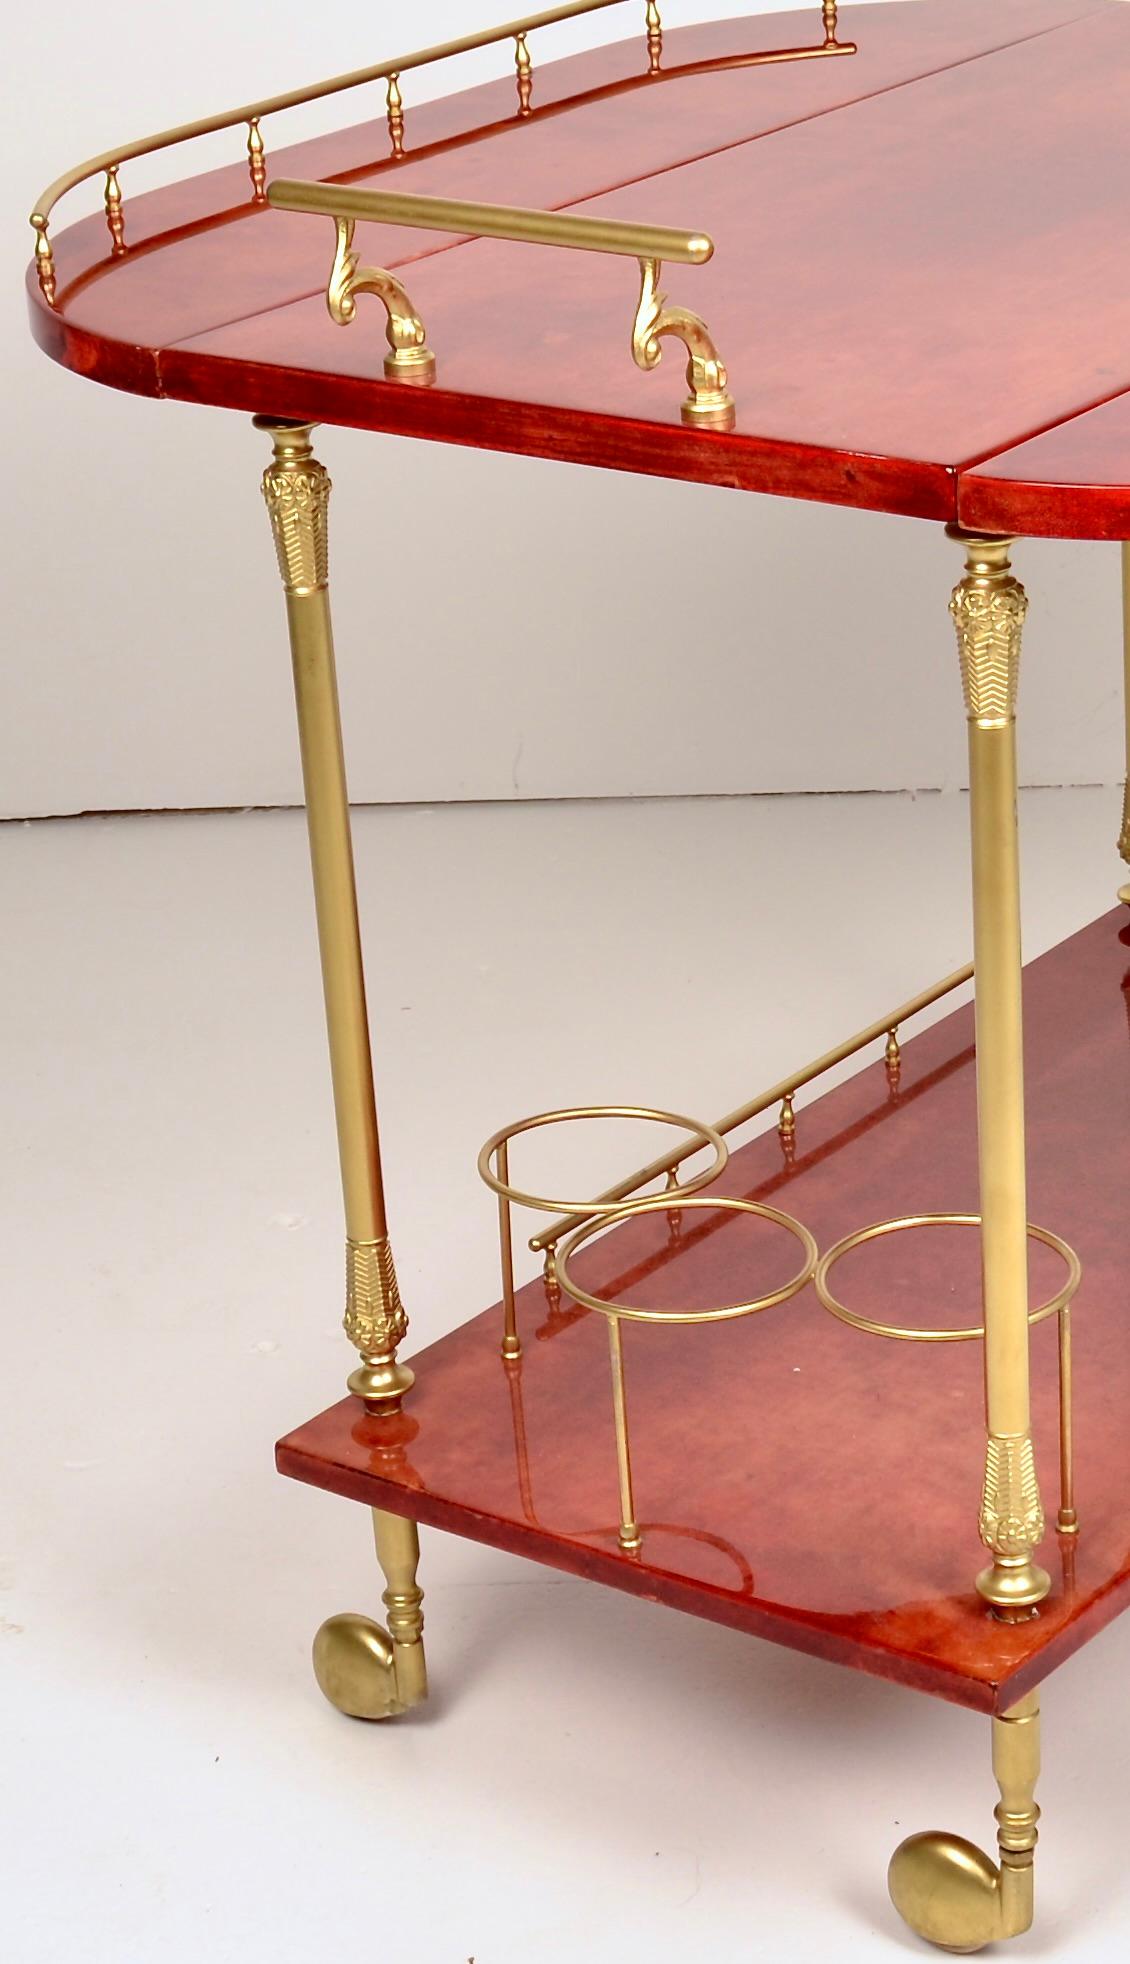 Aldo Tura Lacquered Goat Skin Bar Cart, Italy 1950s For Sale 1